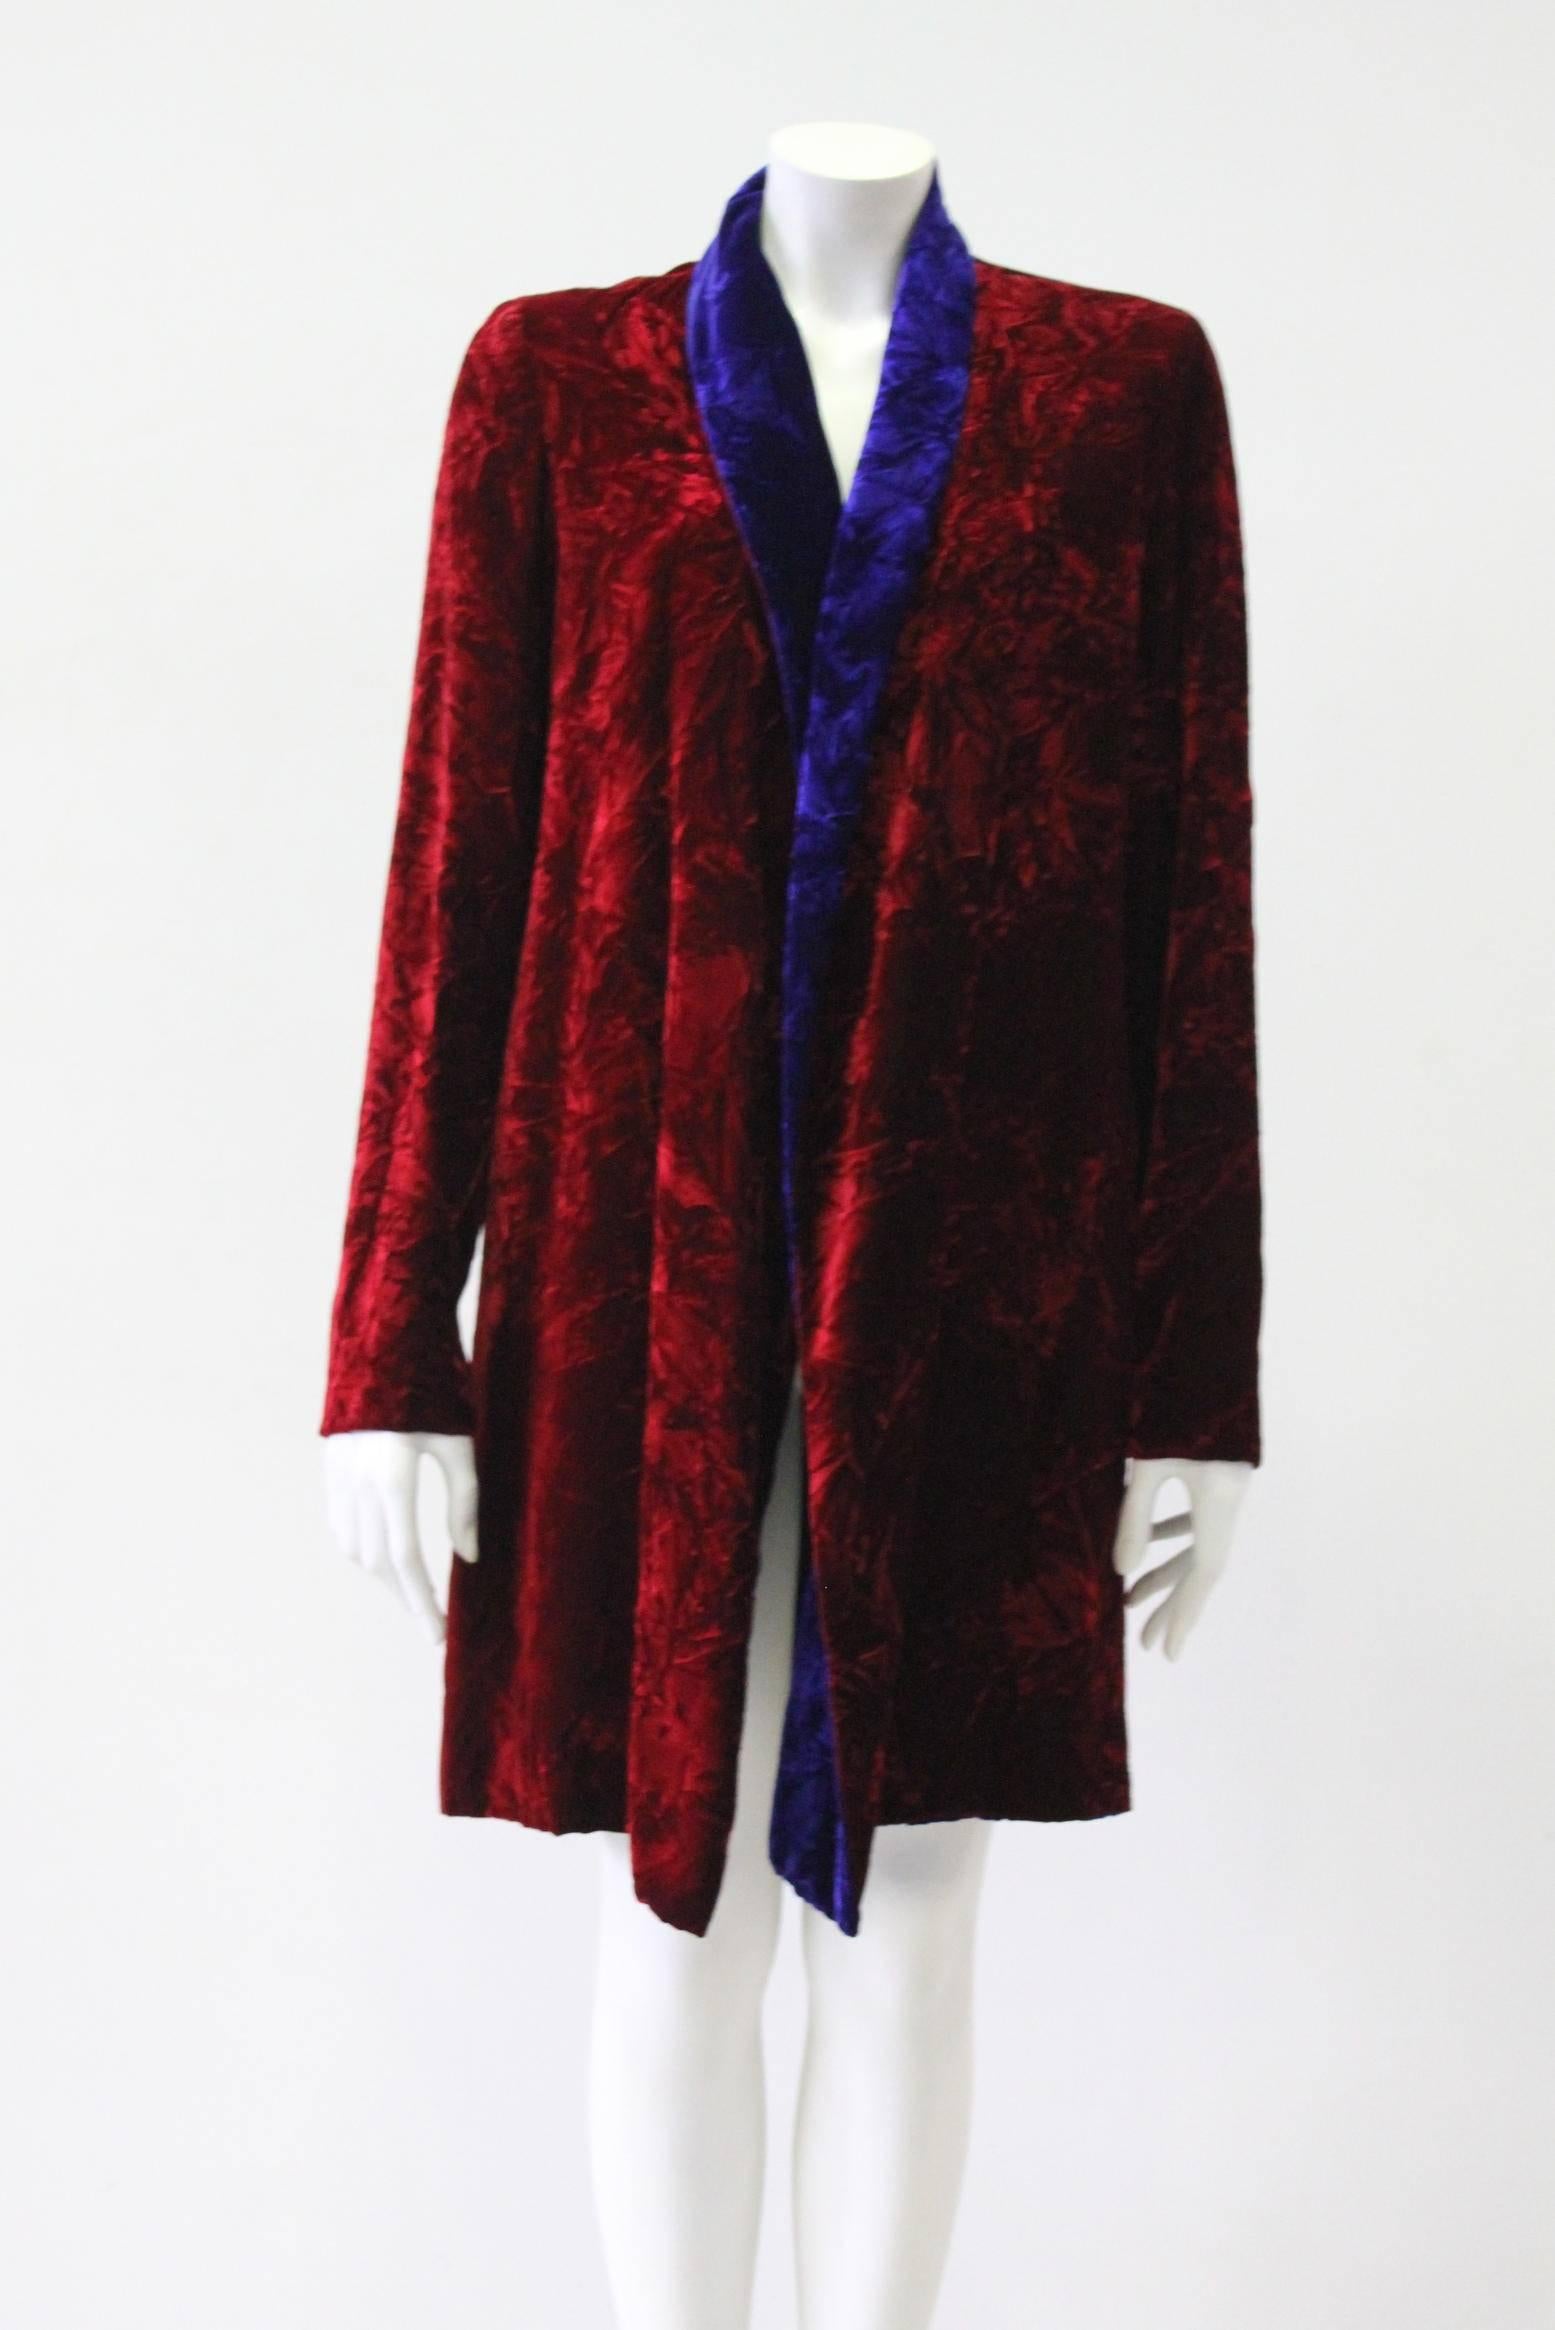 Women's Istante By Gianni Versace Crushed Velvet Evening Coat Fall/Winter 1997 For Sale